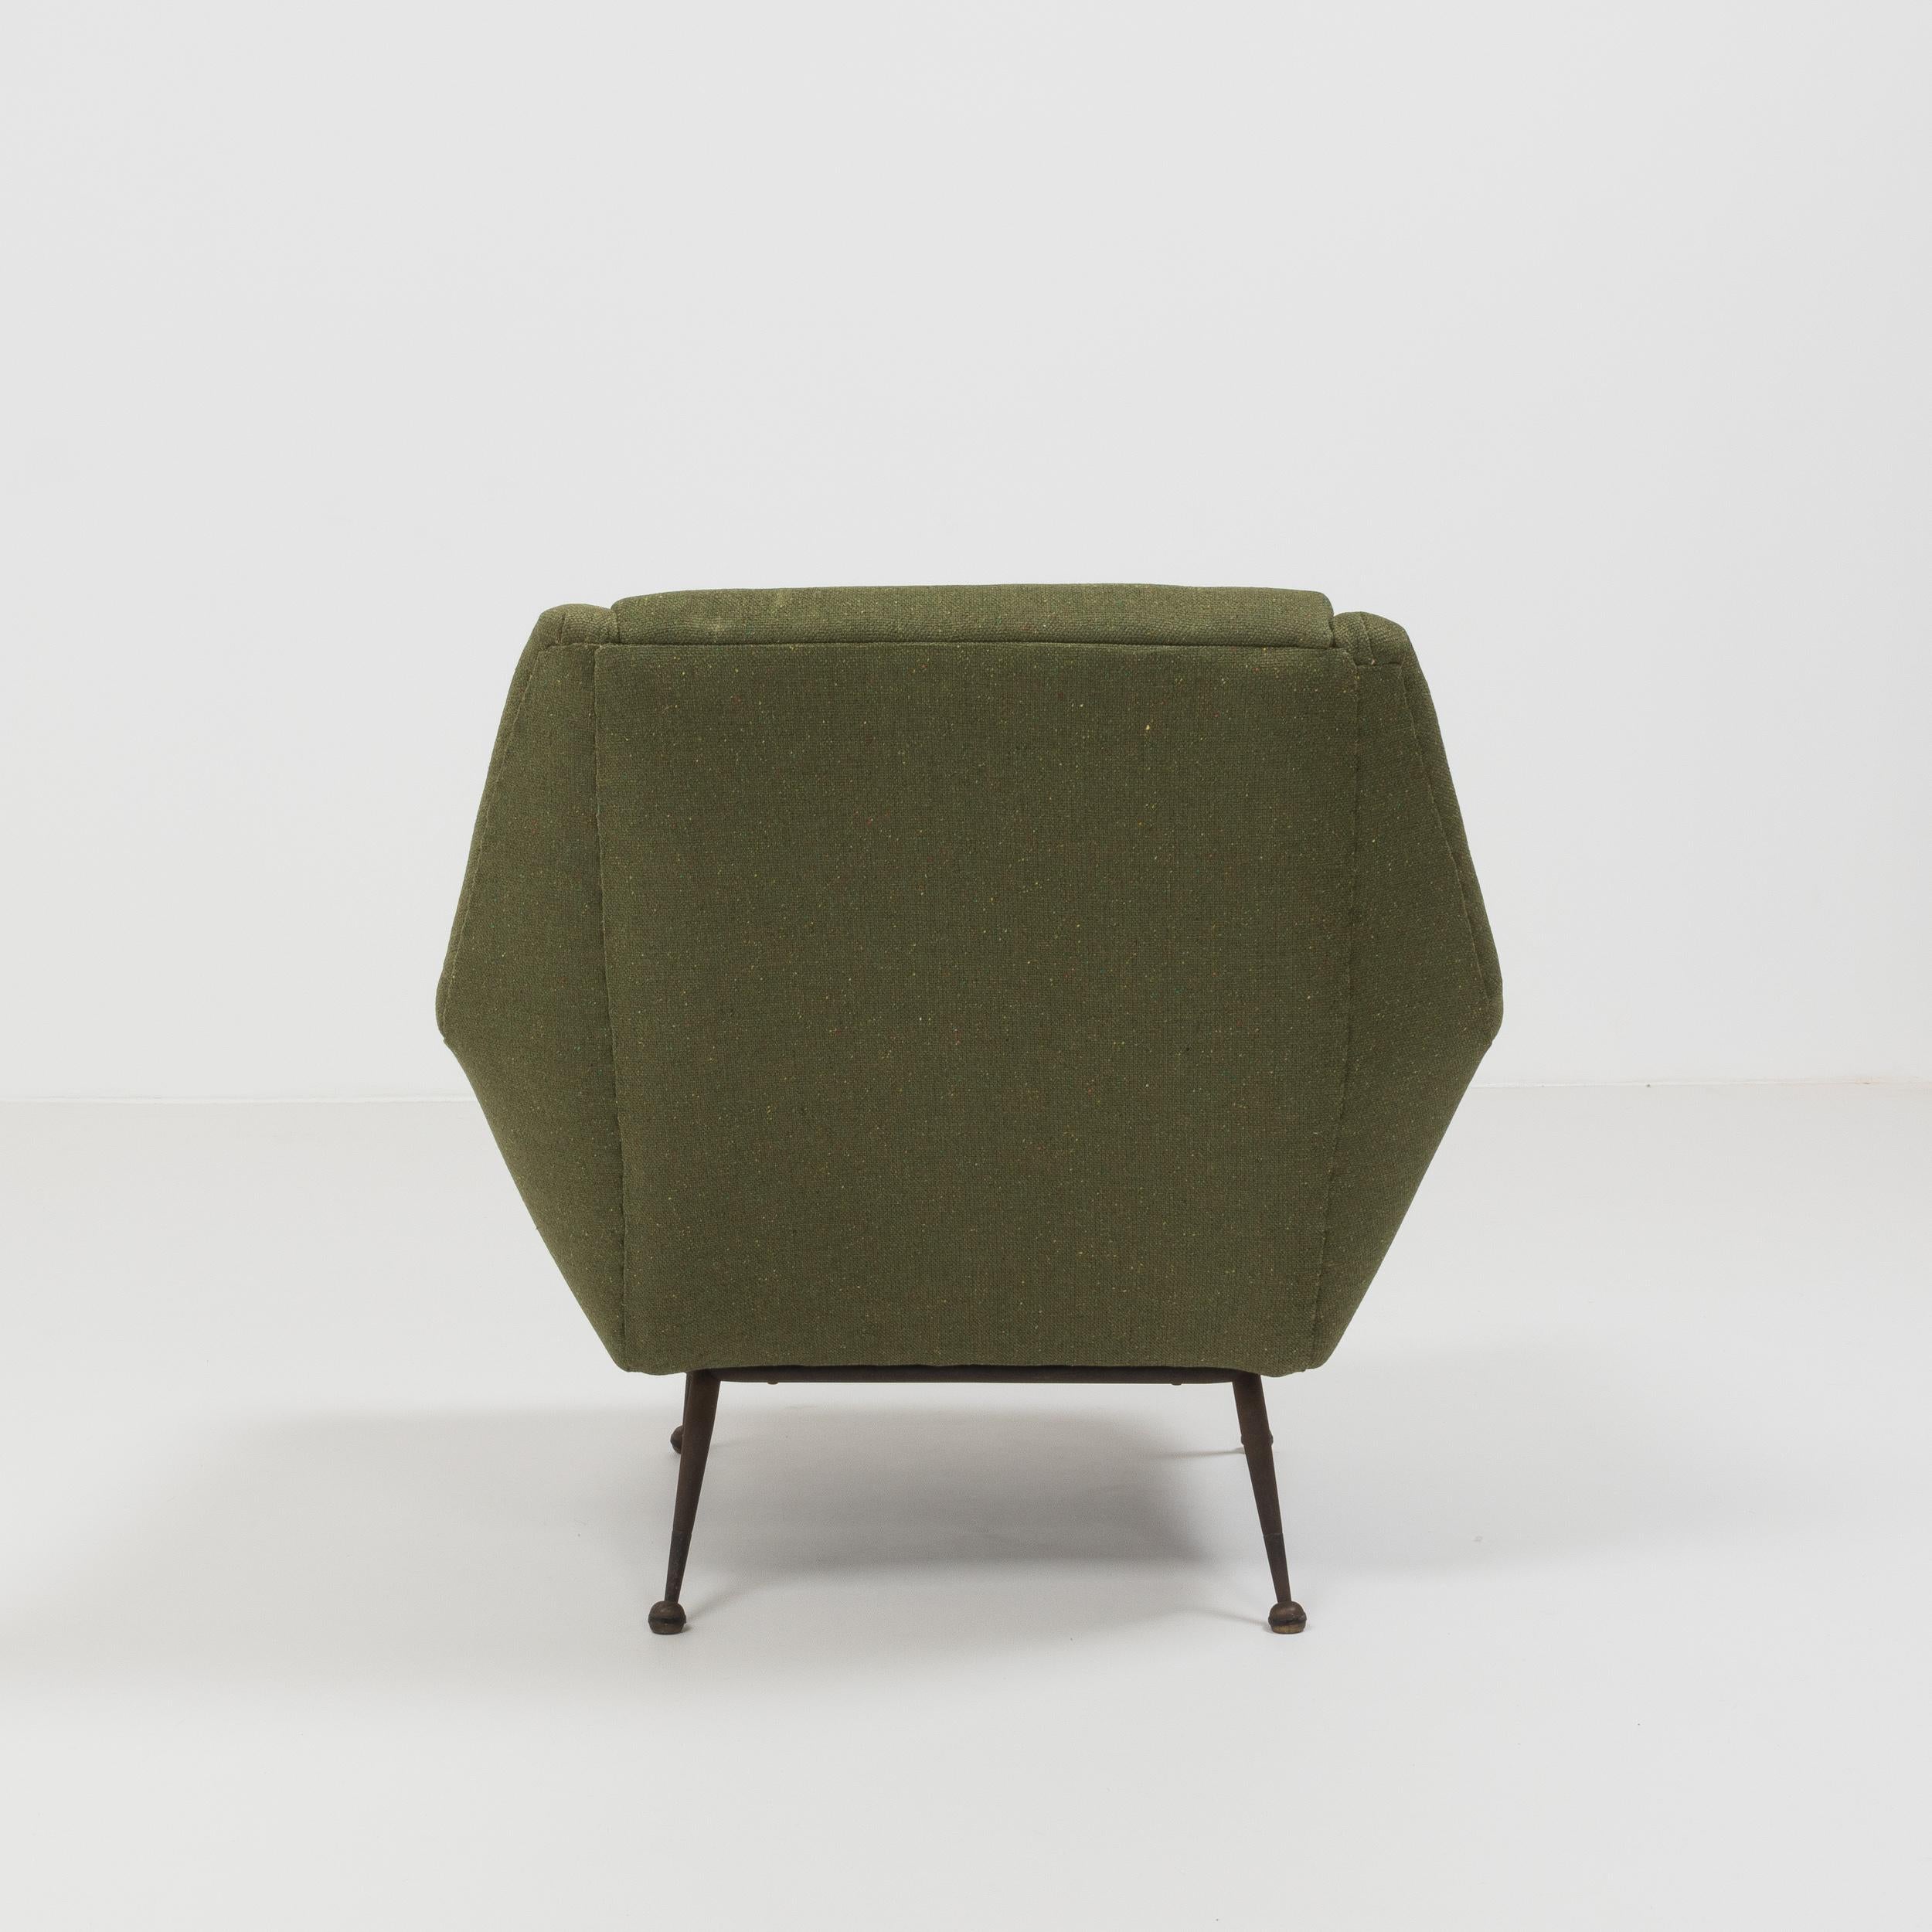 Mid-20th Century Midcentury Lounge Chair by Gio Ponti for Minotti in Green Fabric